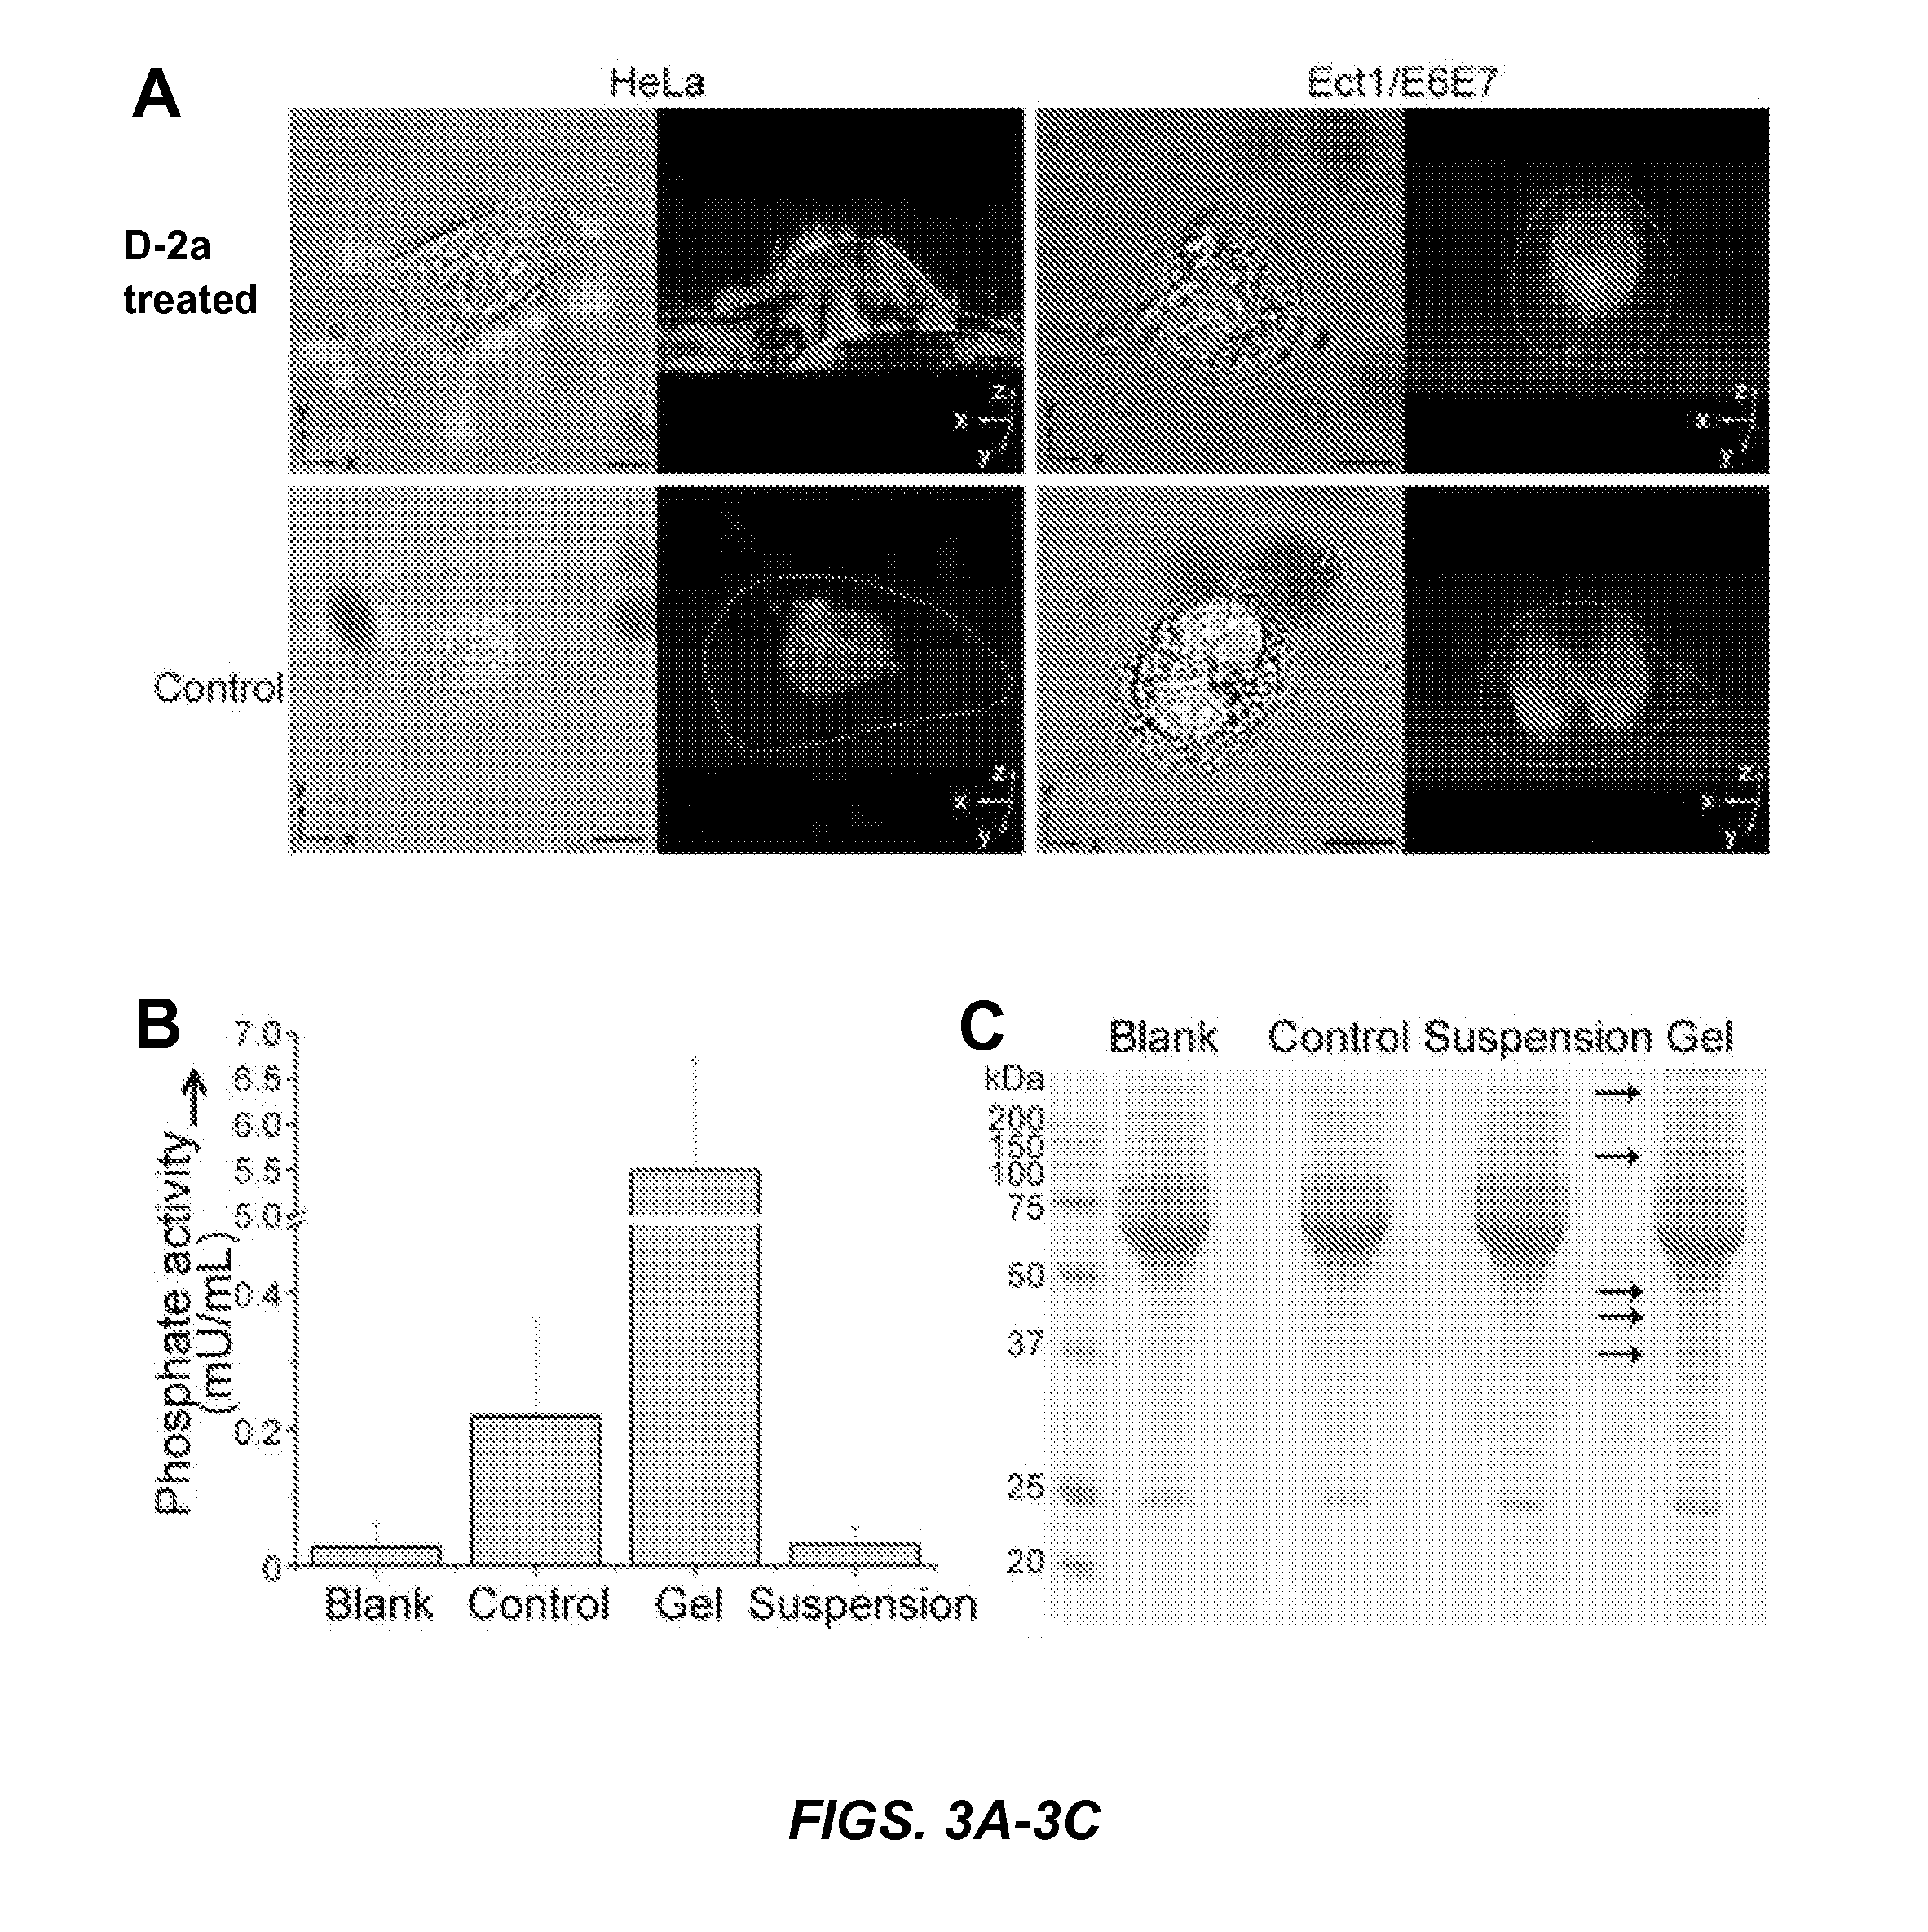 Synthetic peptides, enzymatic formation of pericellular hydrogels/nanofibrils, and methods of use